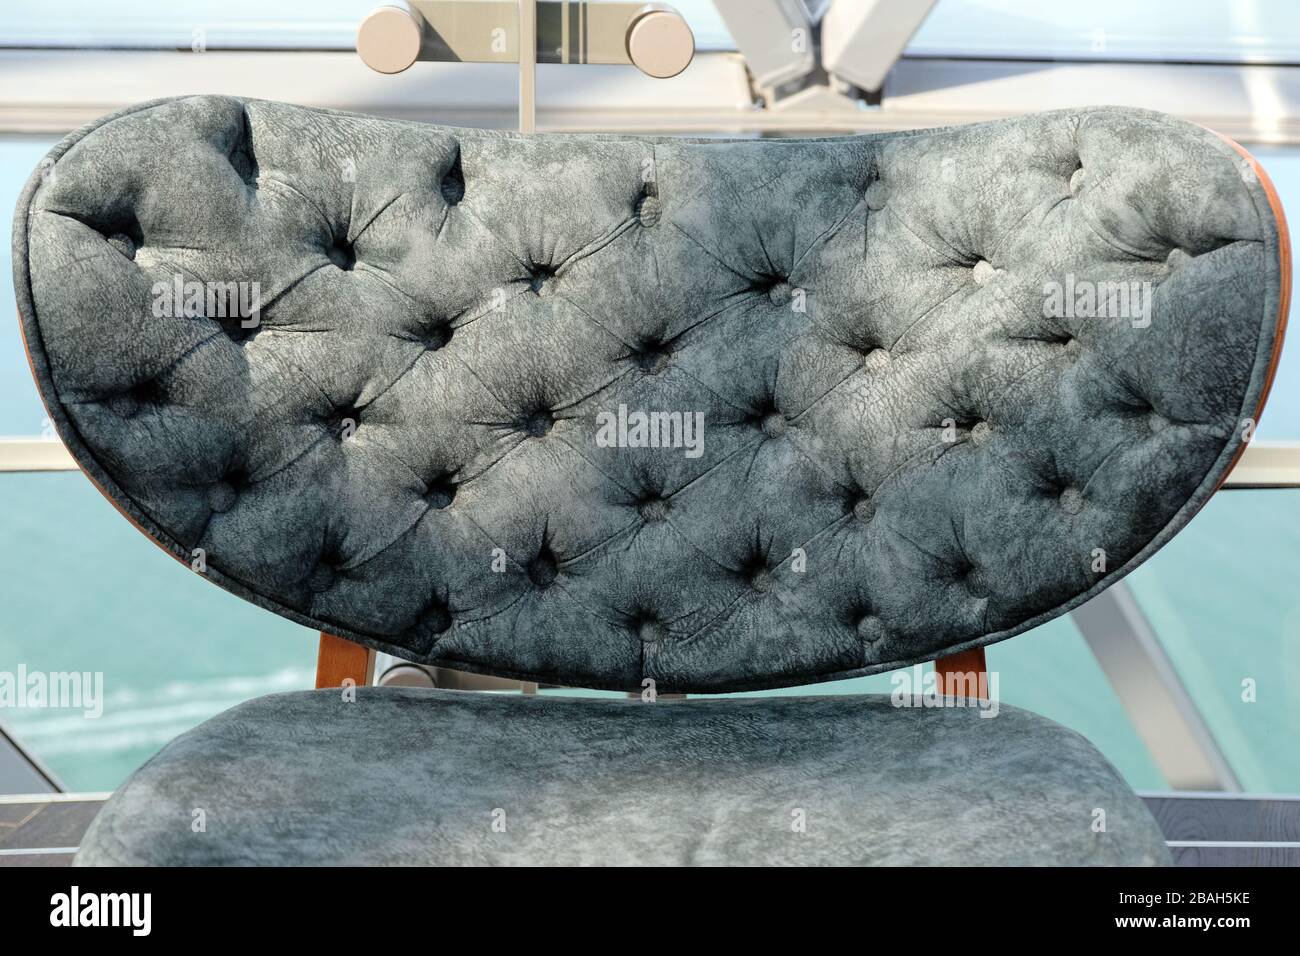 The stylish soft chair sheathed by fabric of green color. Fashionable new furniture for a modern interior. Stock Photo